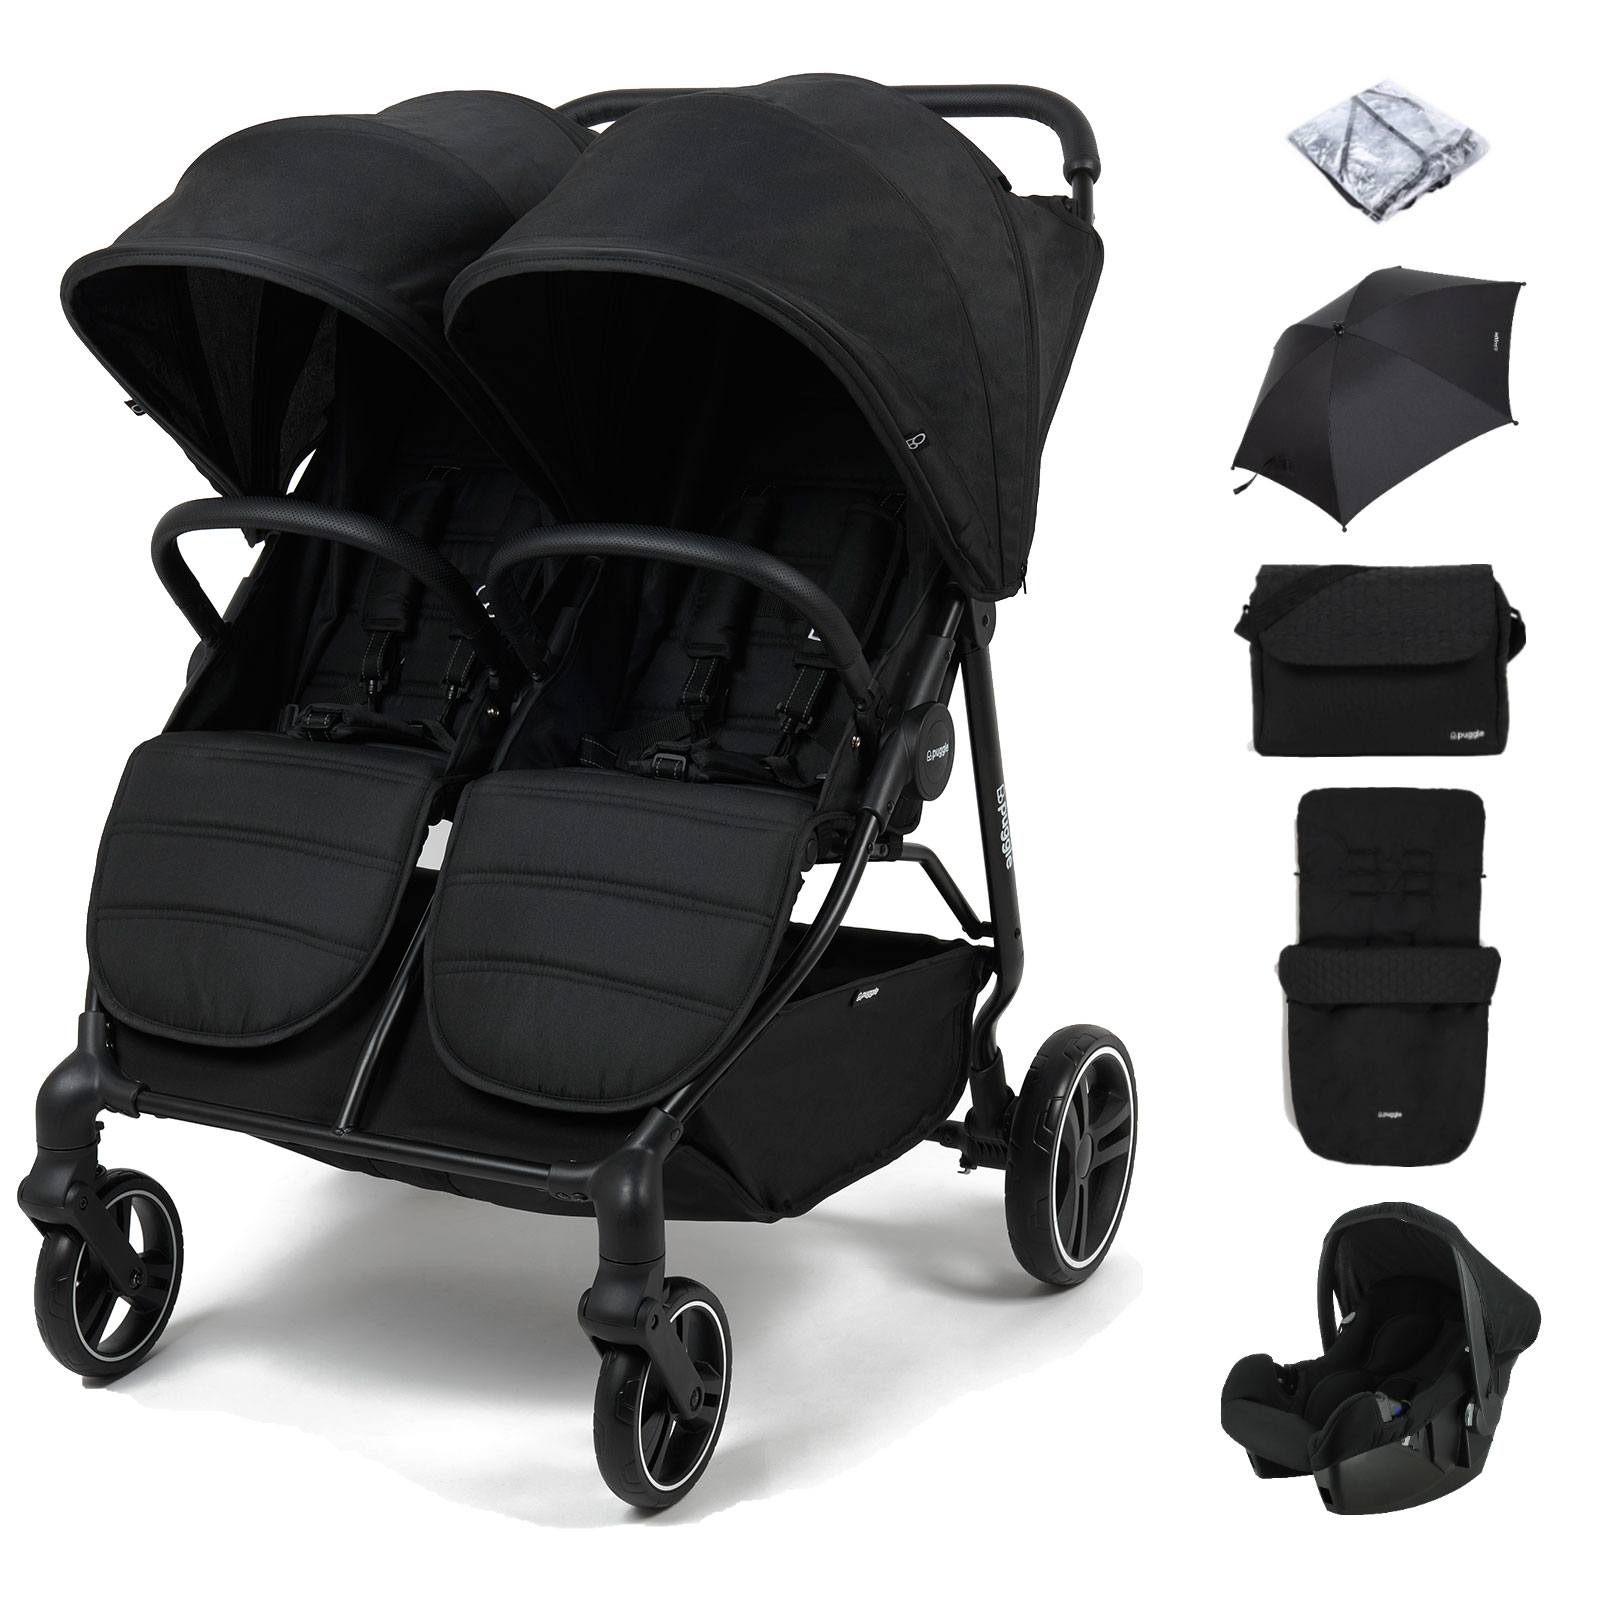 Puggle Urban City Easyfold Twin Pushchair with Beone Car Seat, Footmuff, Parasol & Changing Bag – Storm Black